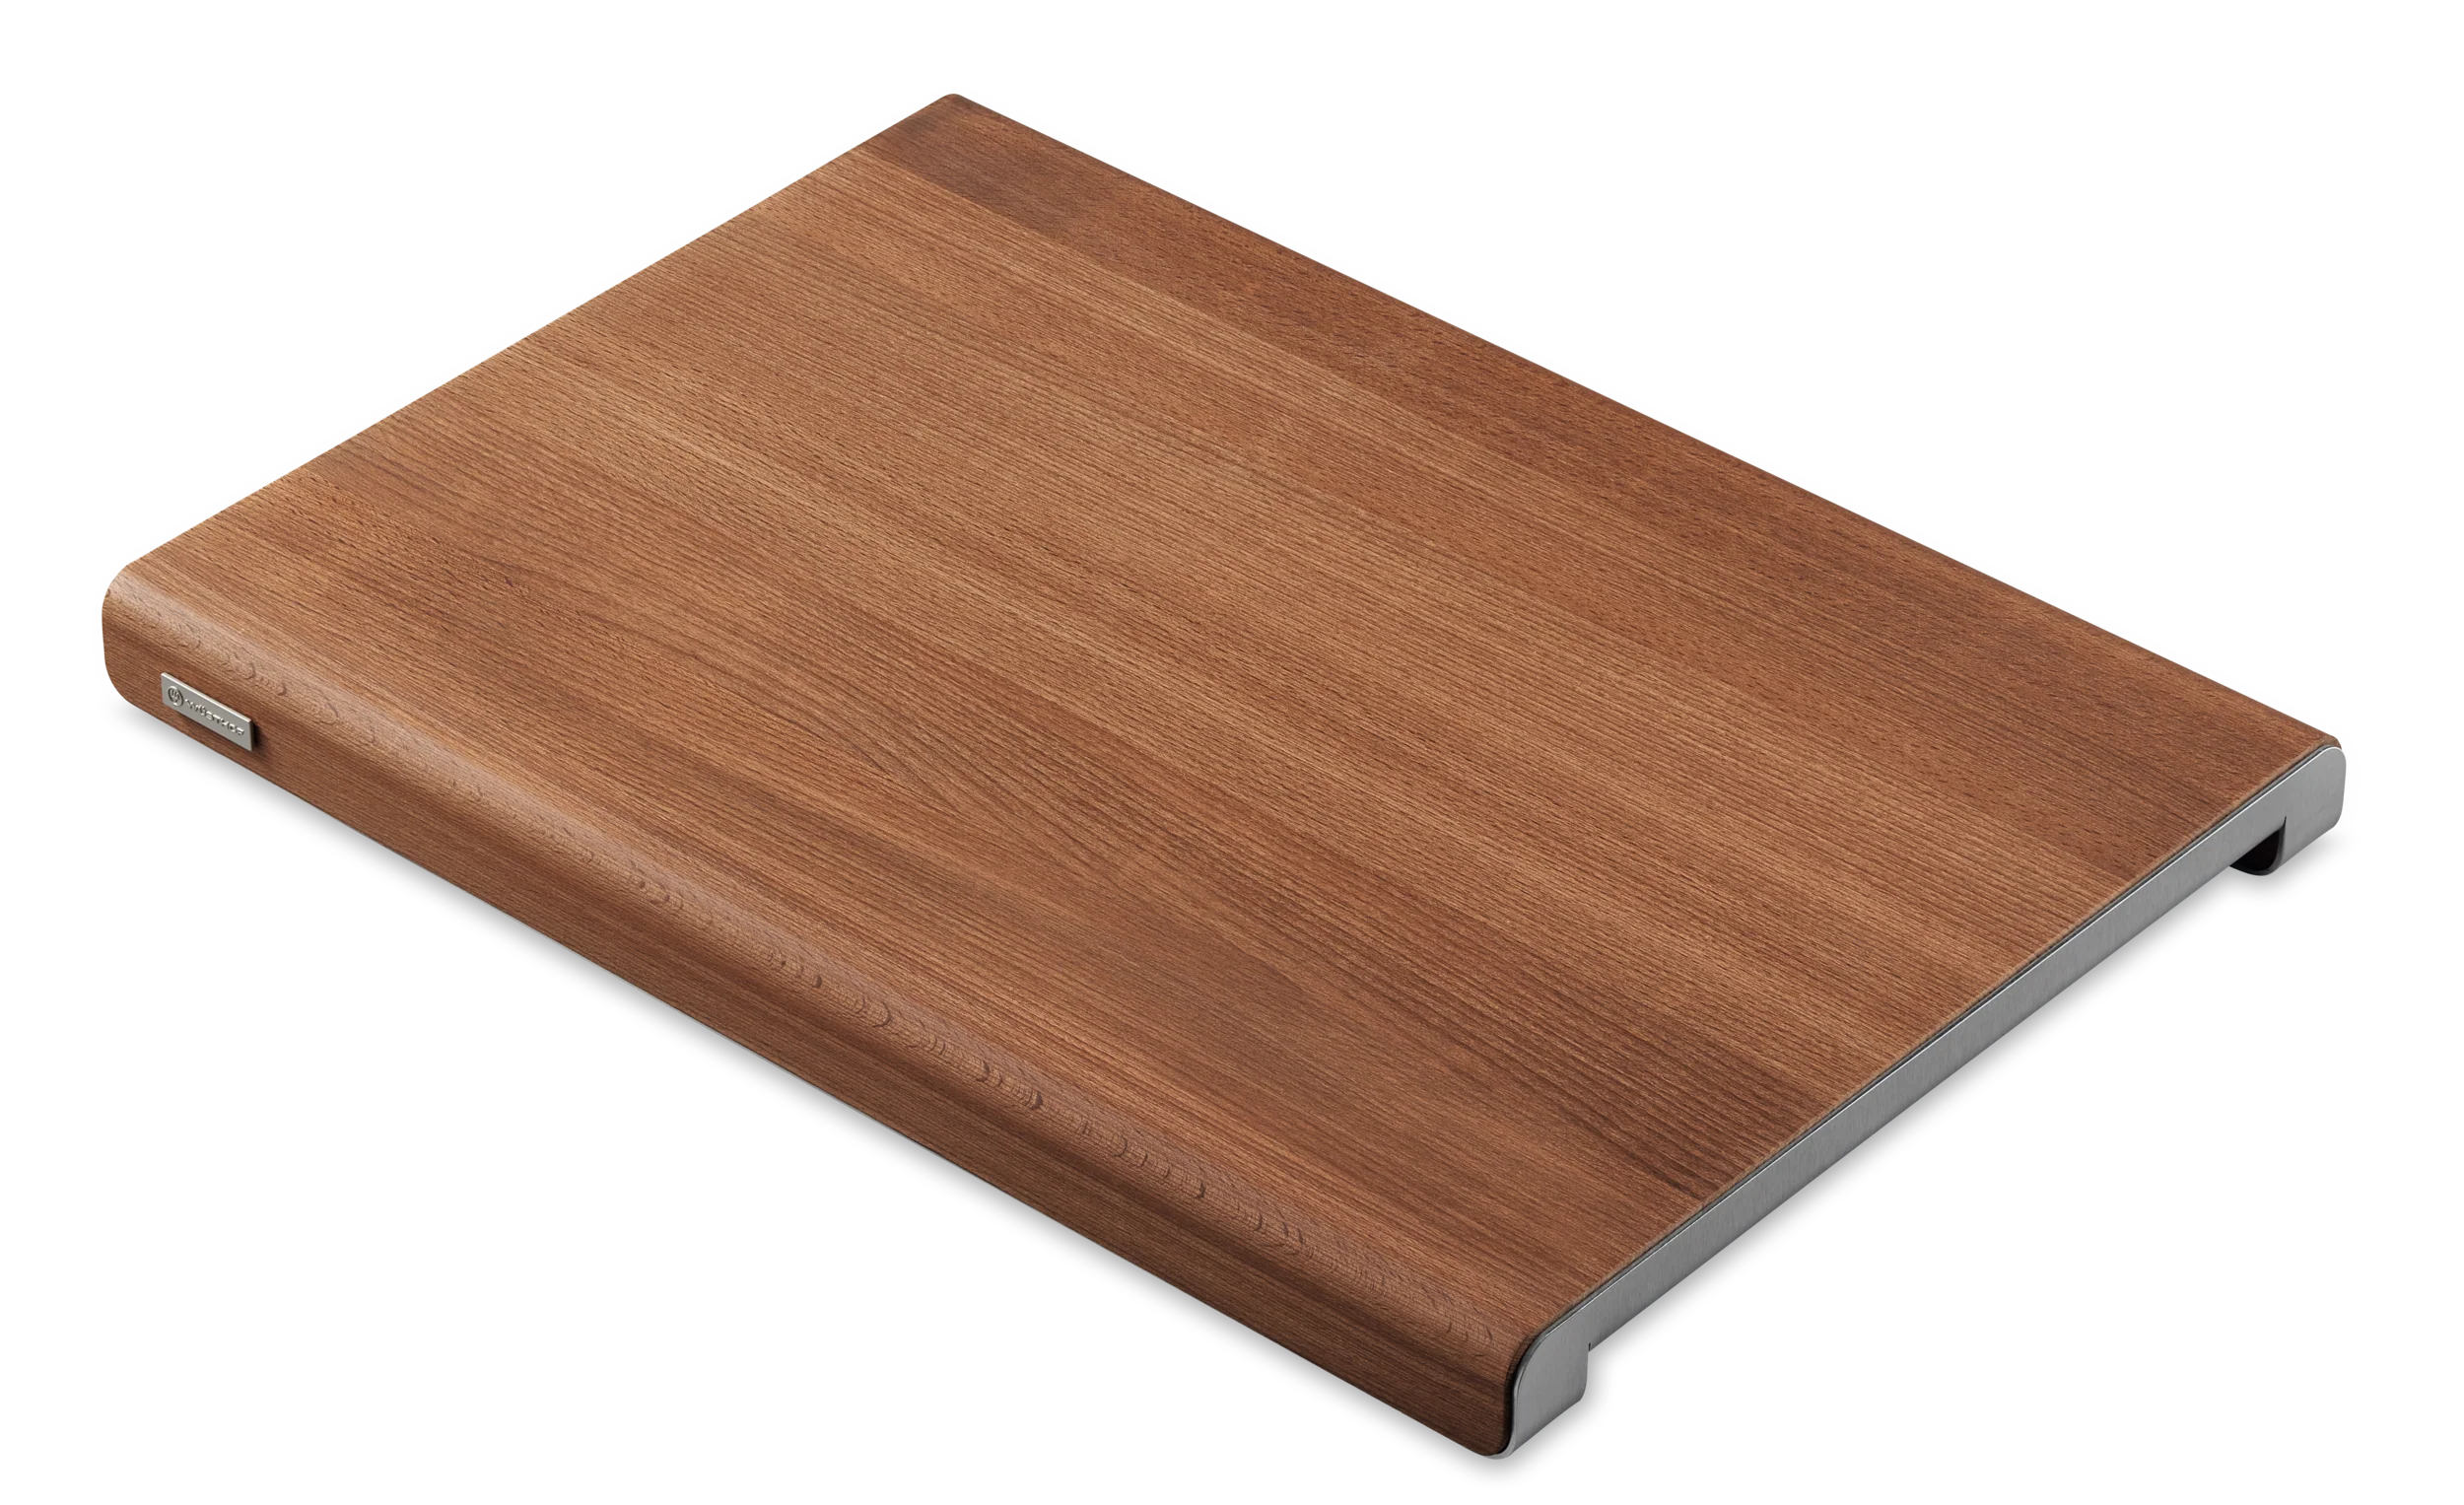 Wusthof Cutting Board Thermo Beech Stainless Steel